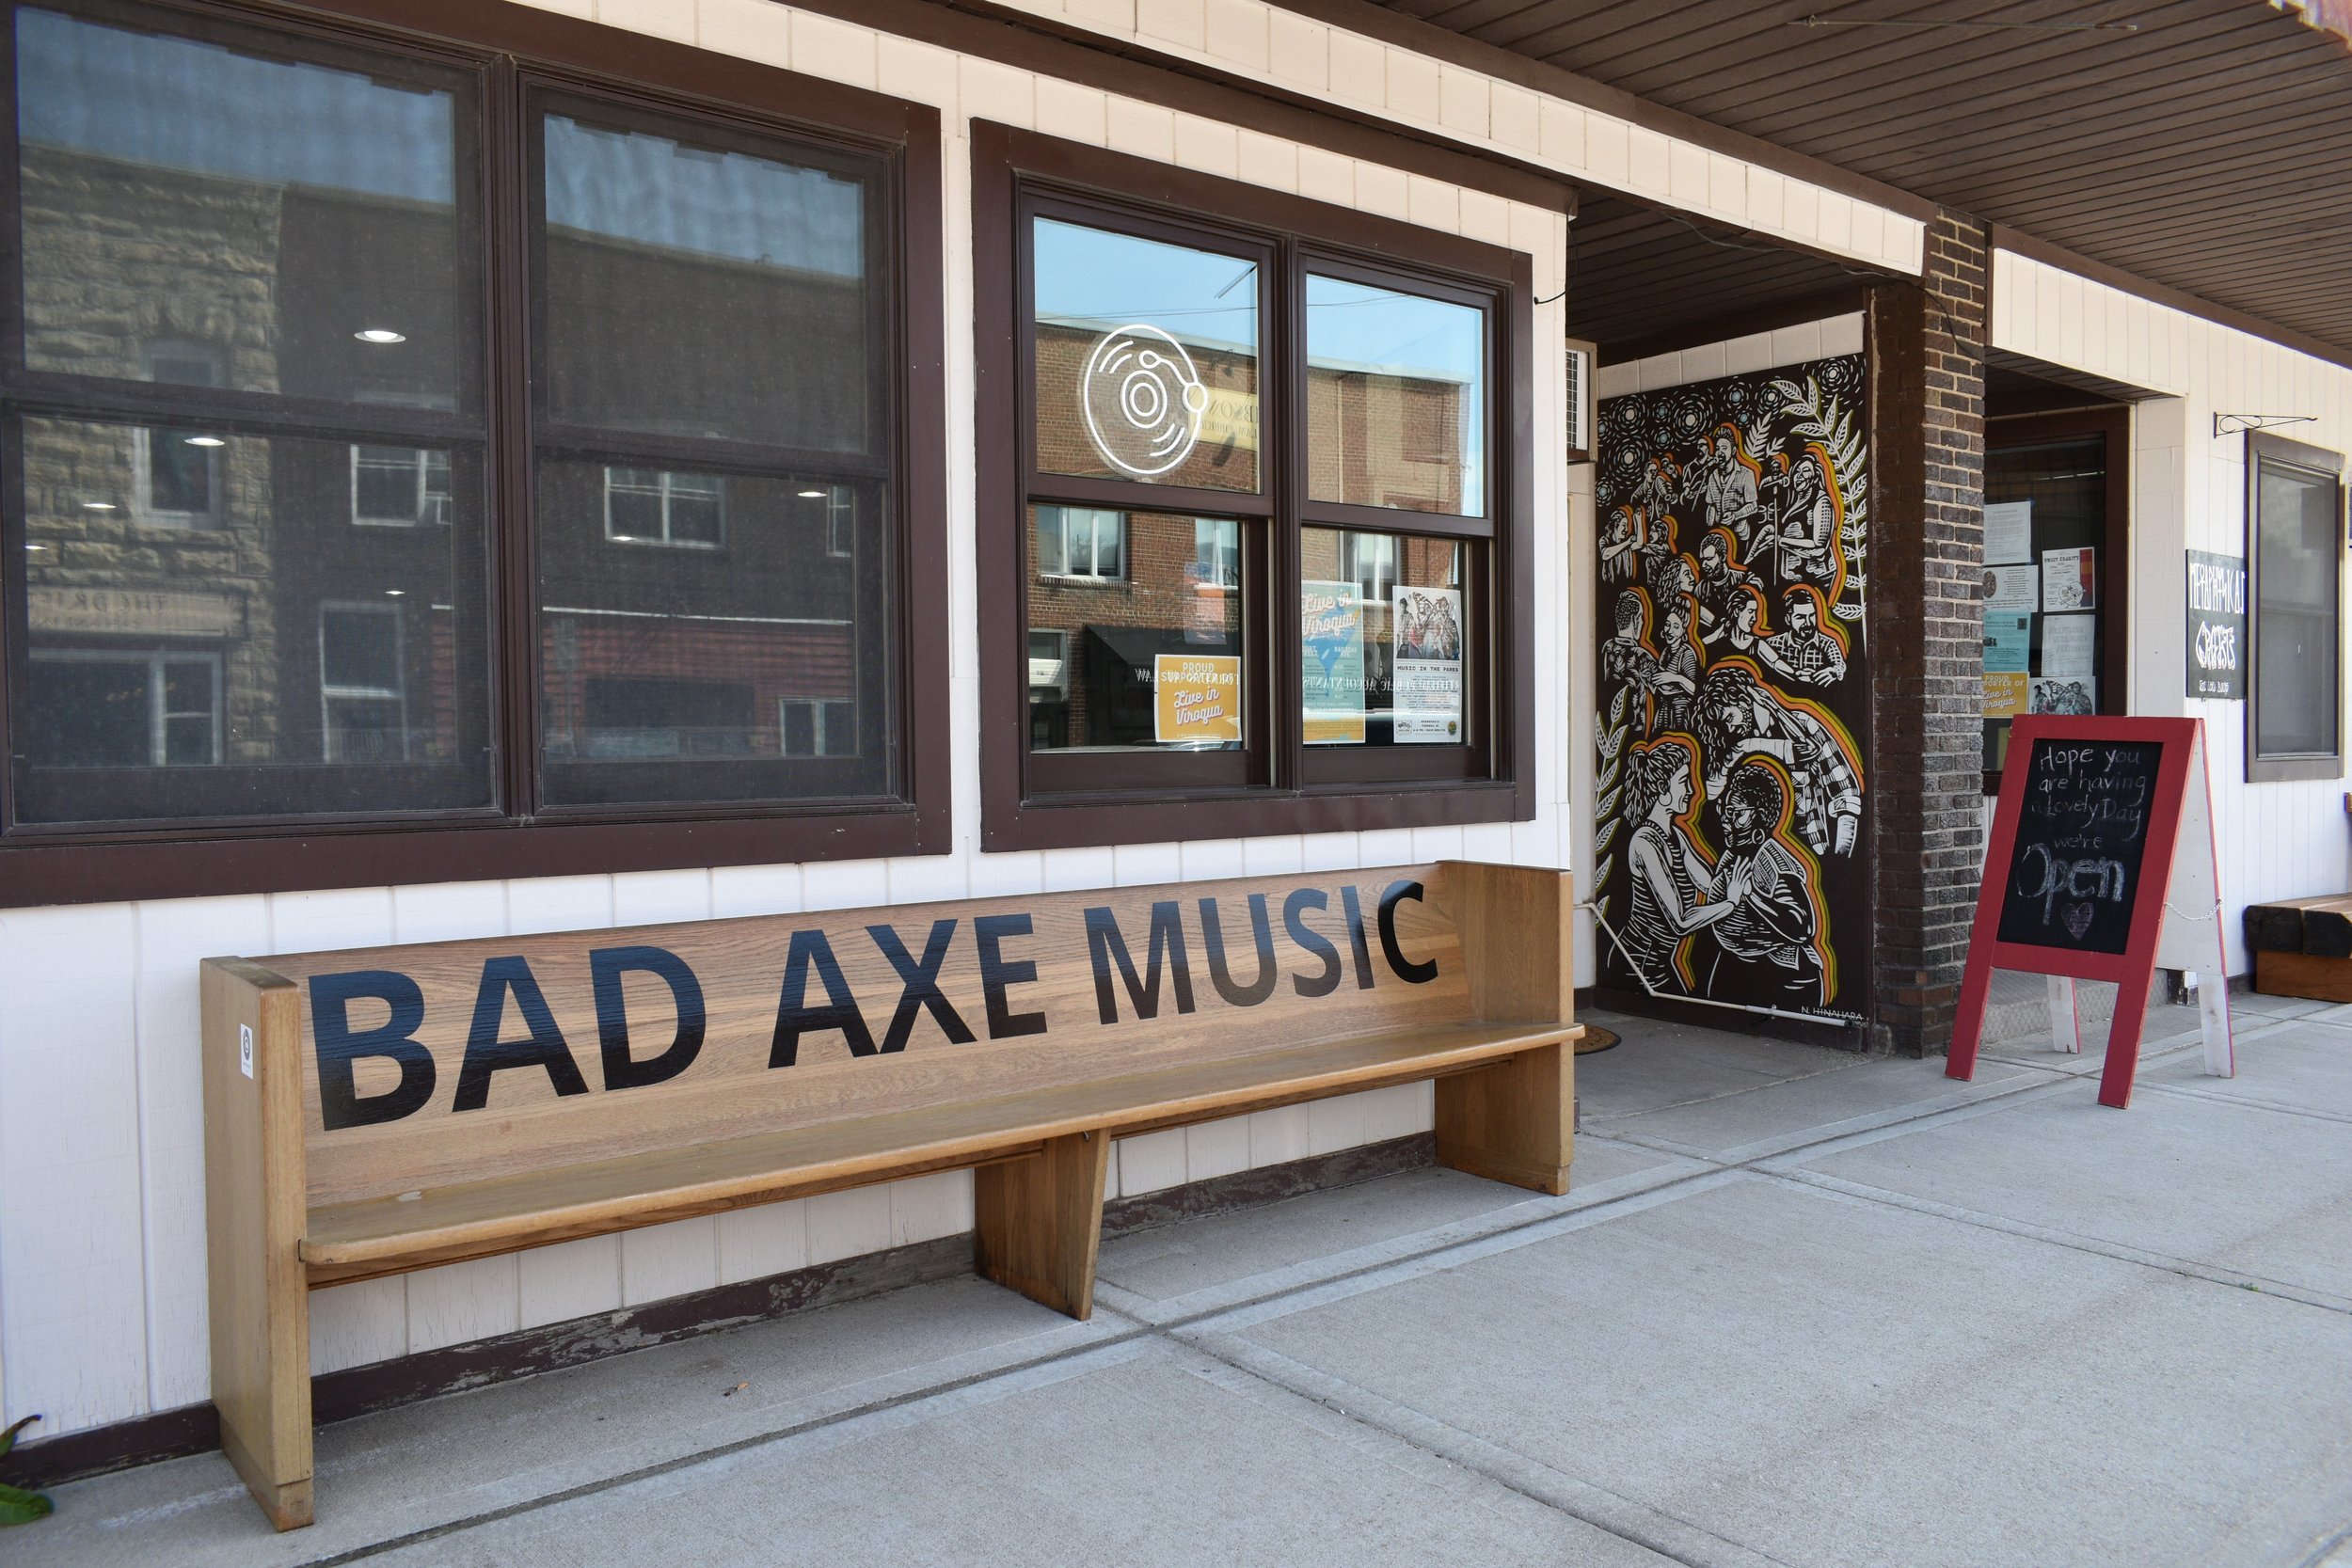  Bad Axe Music and Metaphysical Graffiti are openly connected inside. 